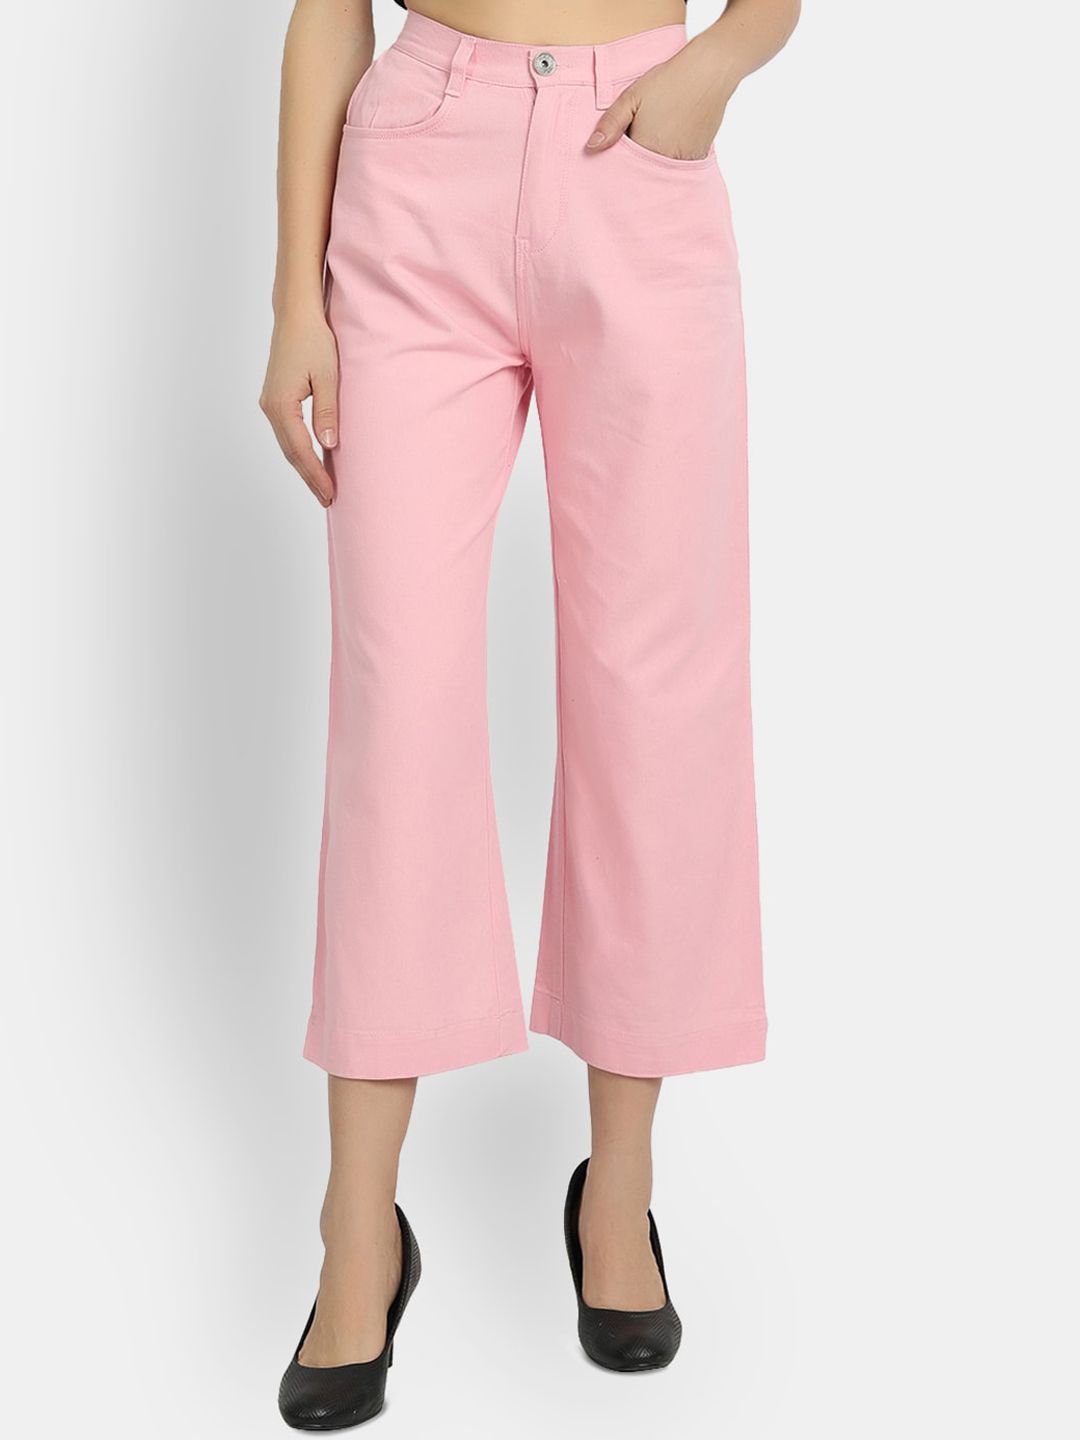 River Of Design Jeans Women Pink Wide Leg High-Rise Jeans Price in India